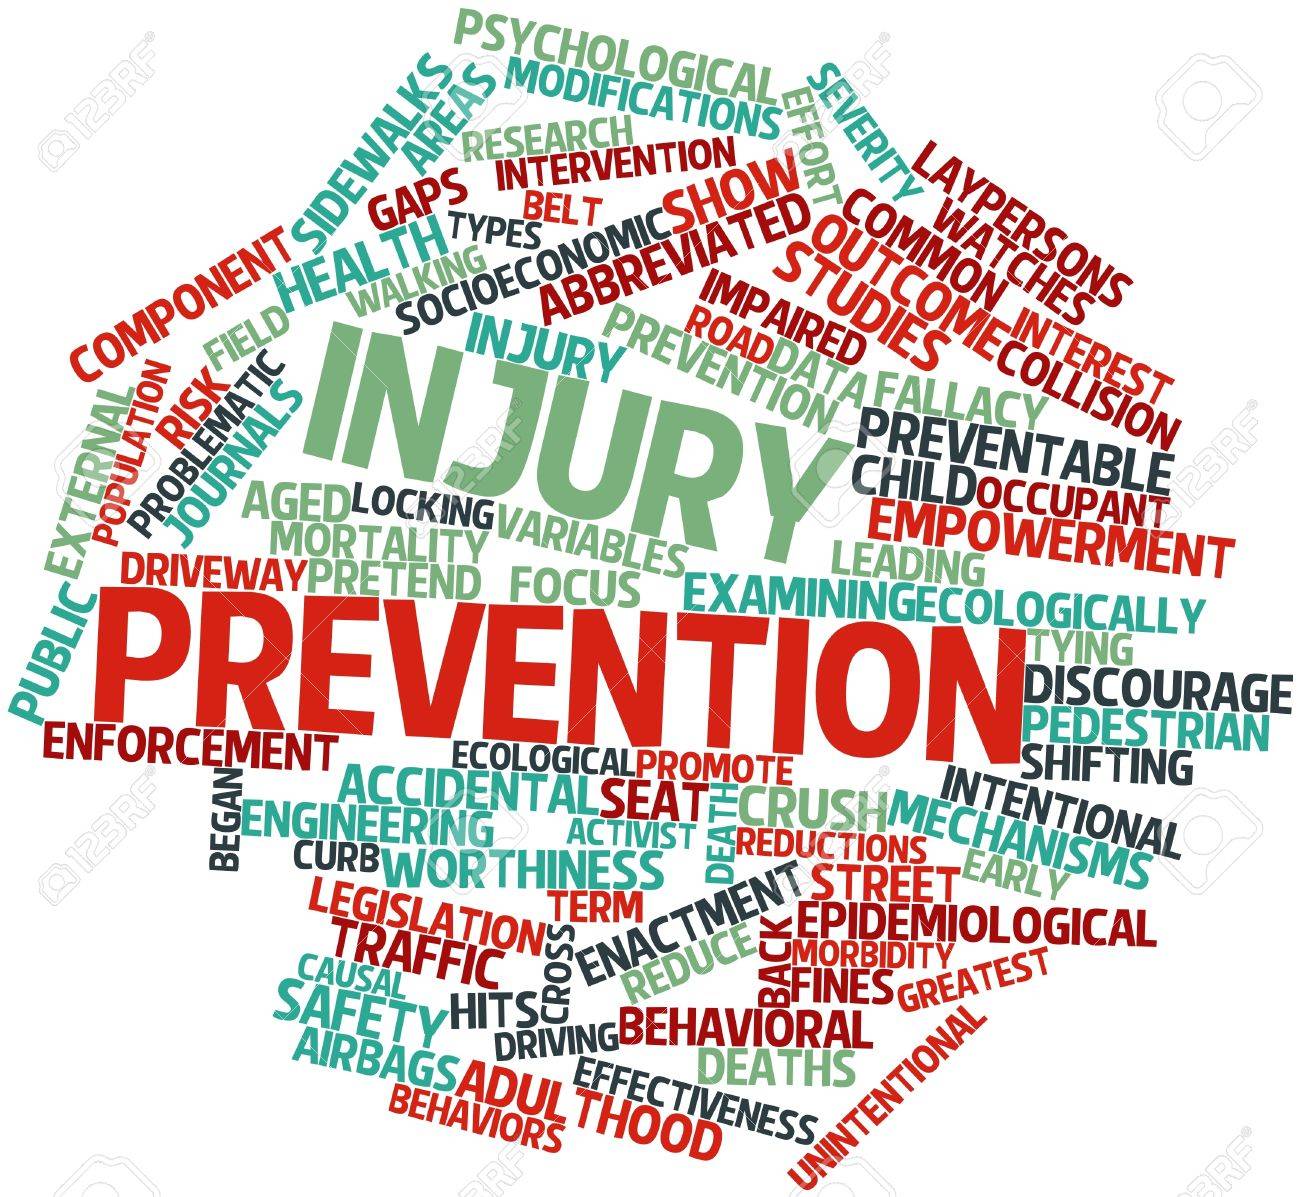 Principles and Practices of Injury Prevention